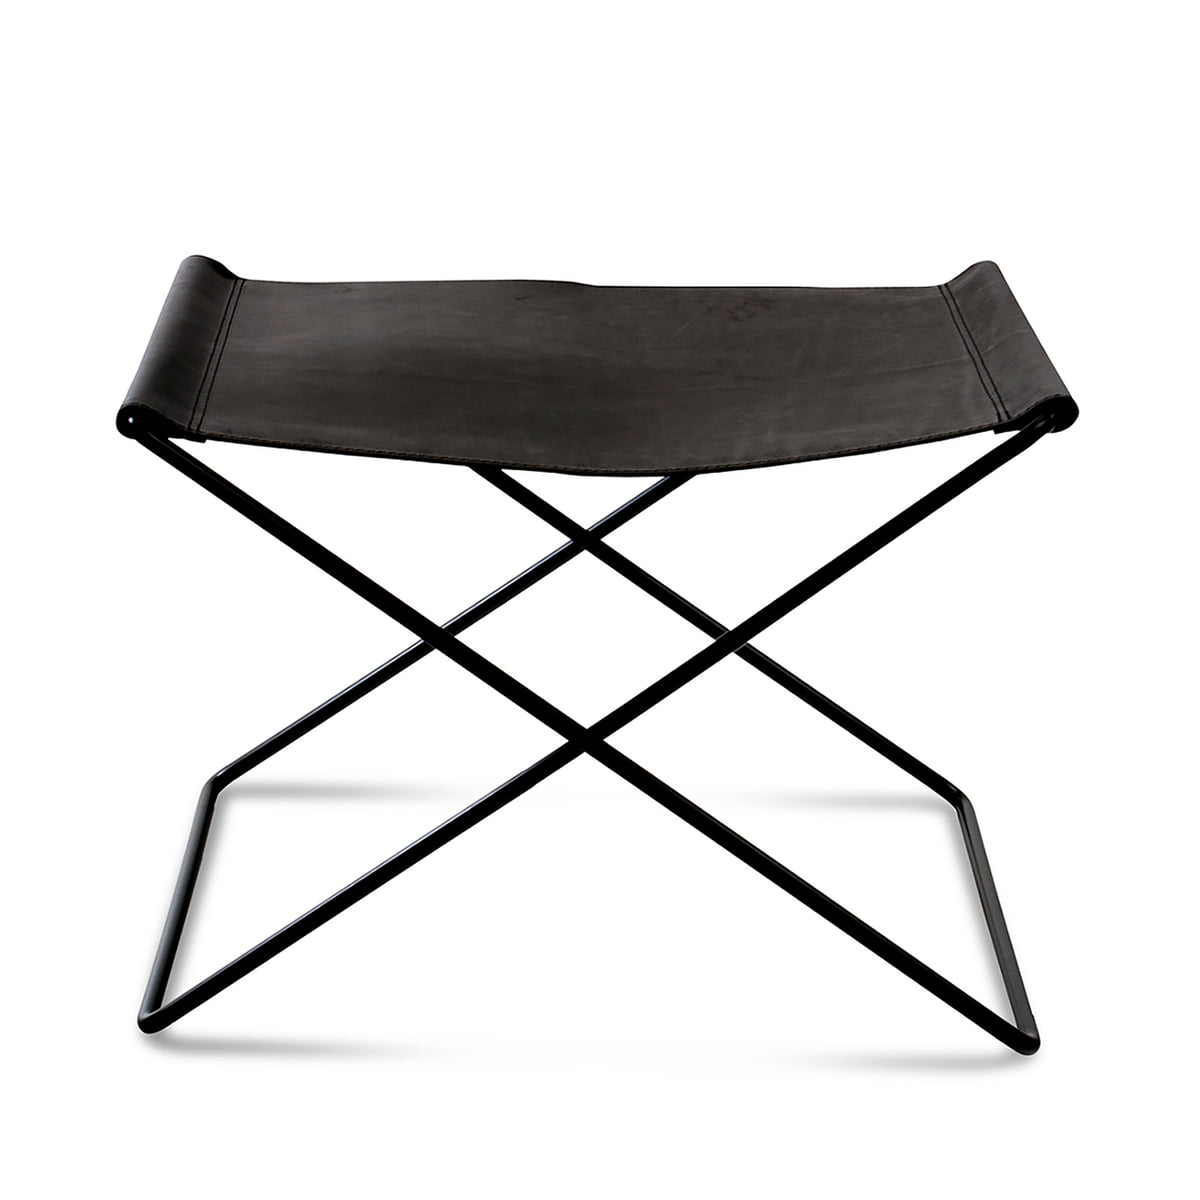 Ox Denmarq - OX Stool, stainless steel / natural